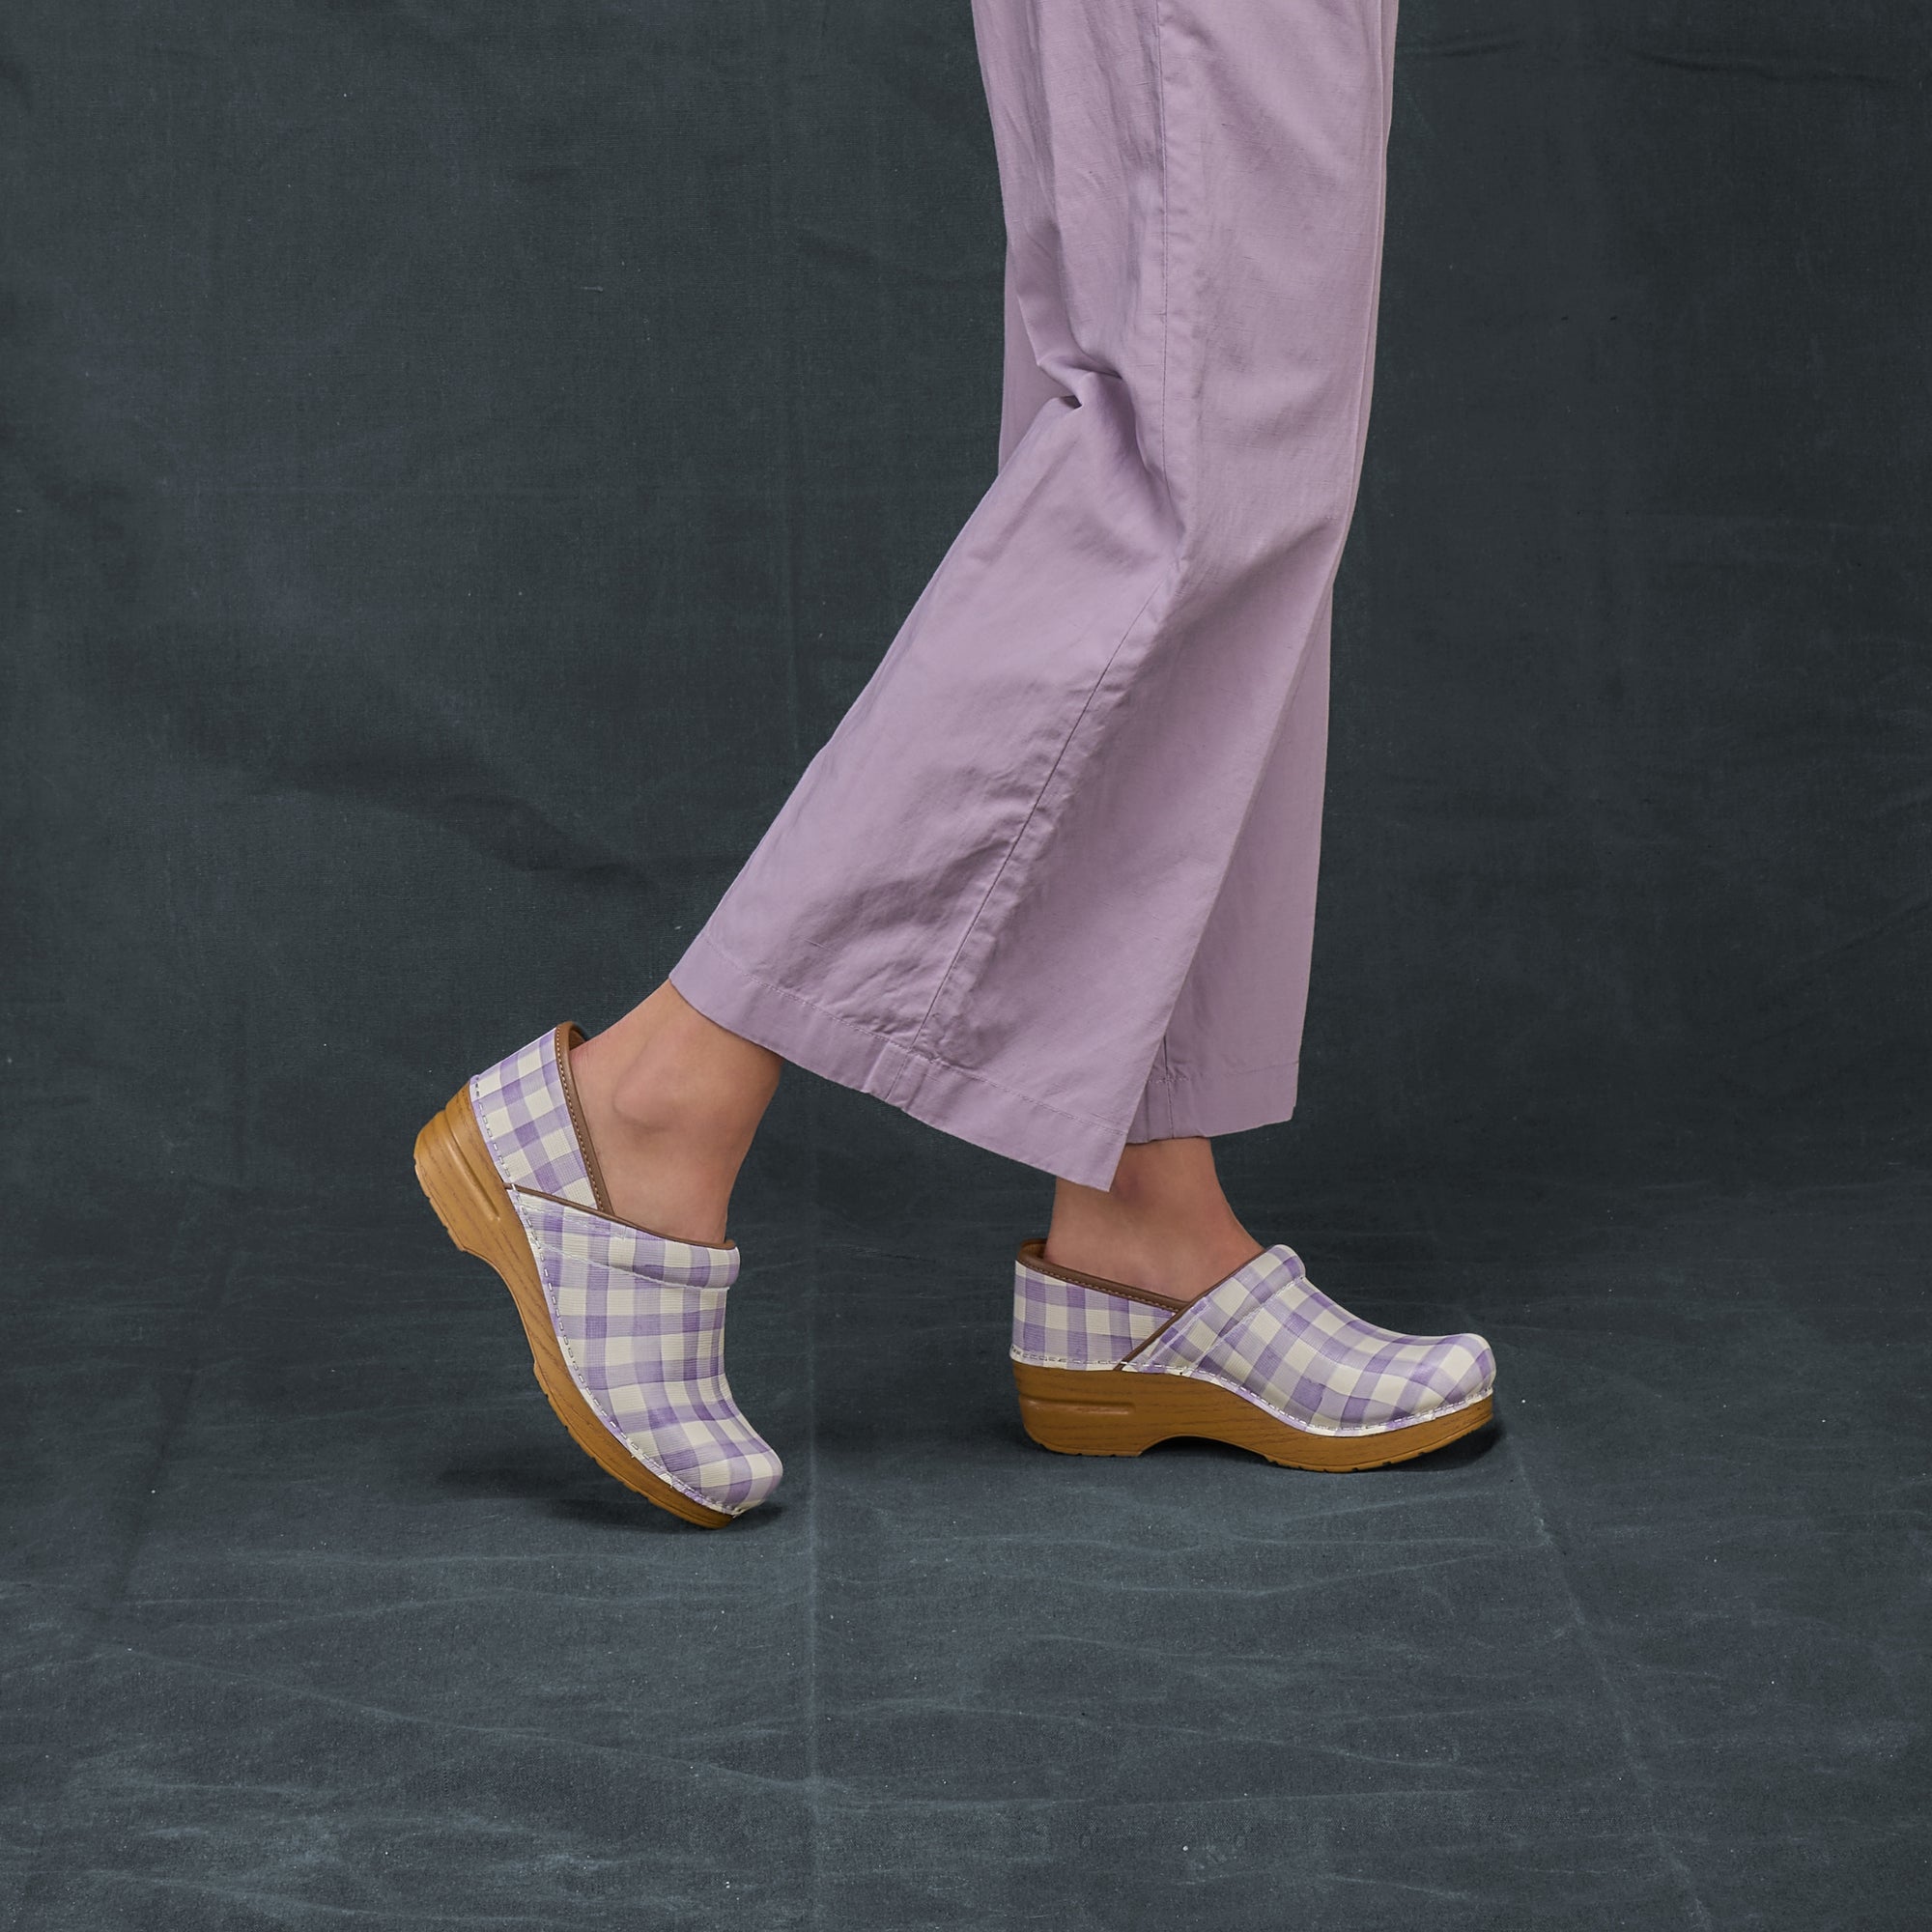 A close look at the lavender plaid clogs against a dark background.